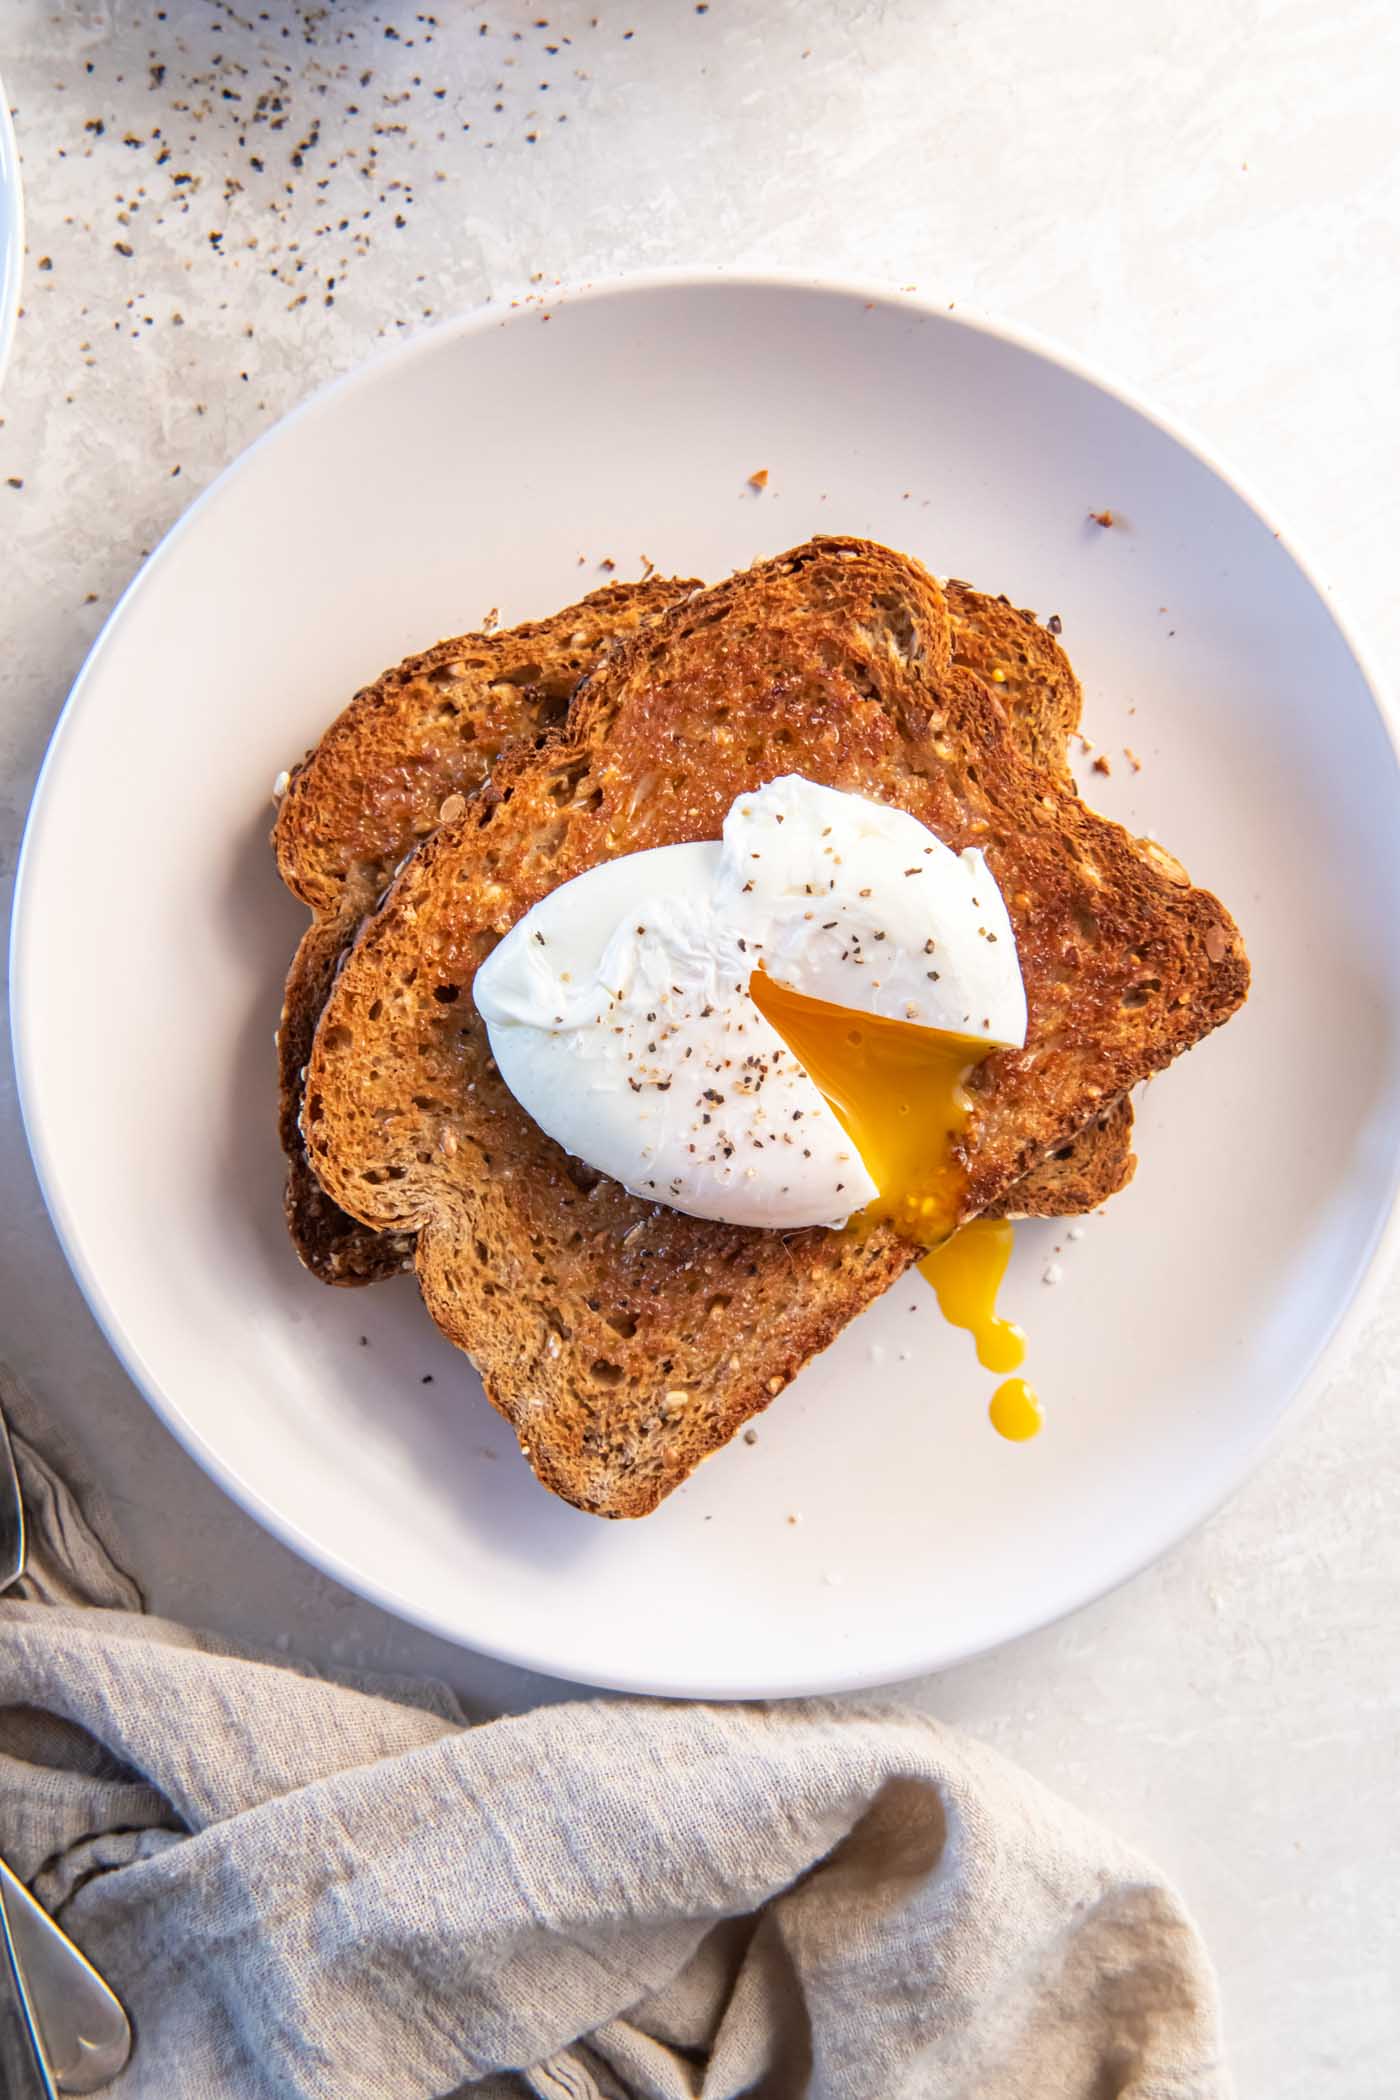 Poached egg served on buttered whole wheat toast.